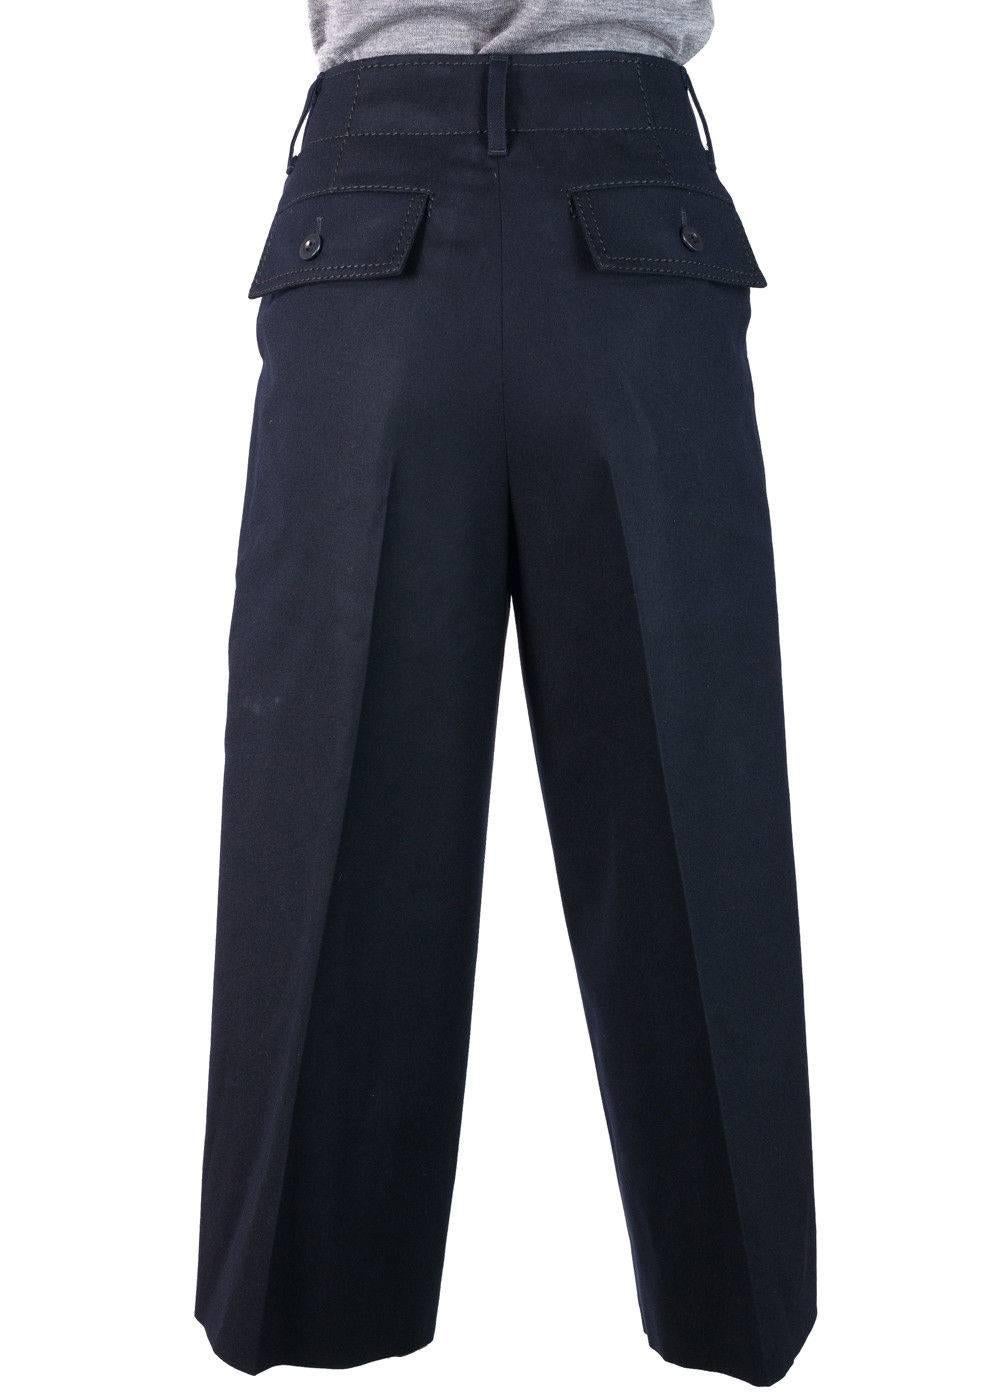 Brand New Sacai Women's Grommet Trim Pocket Culottes
Original with Tags
Retails in Stores & Online for $665
Size Japanese 1 / USA 6 

Sacai blends the overtly masculine silhouette with the serenely feminine in these Culottes. This piece was designed